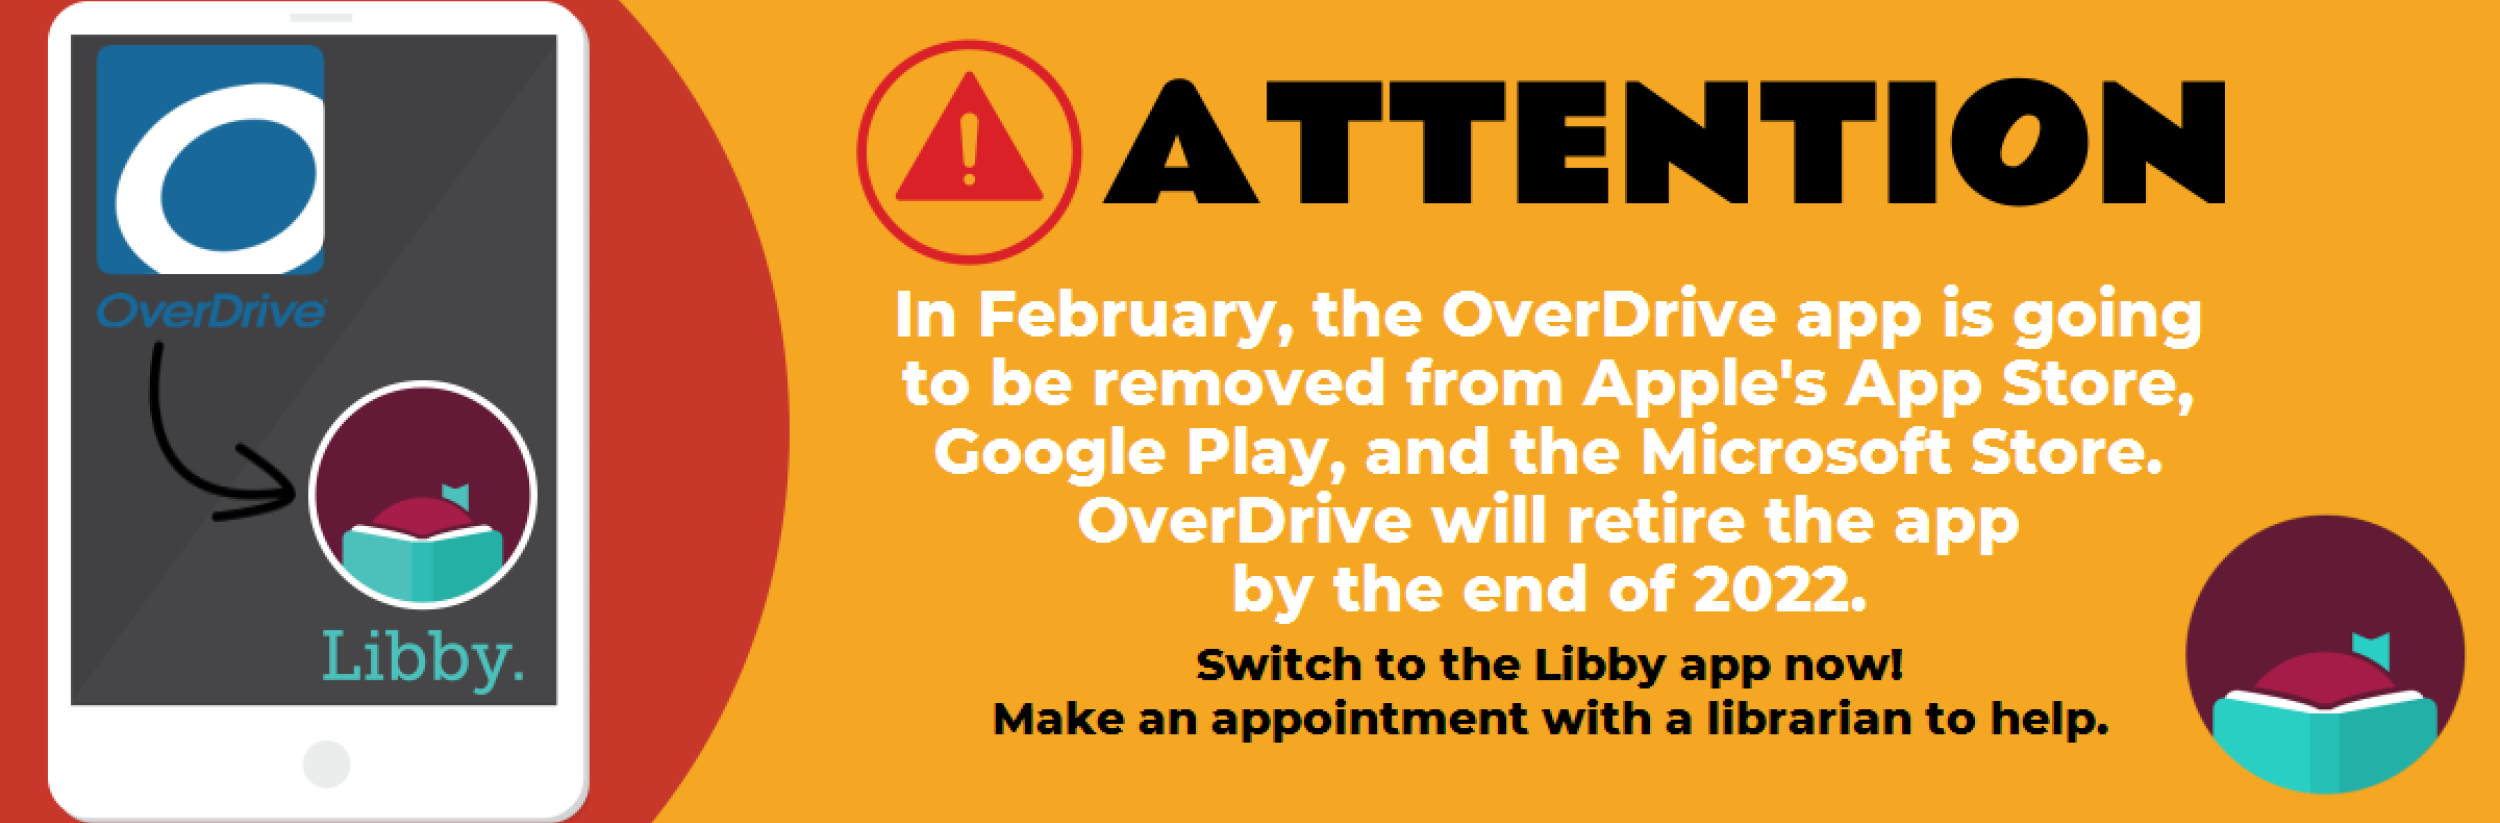 Image for "OverDrive app retirement"